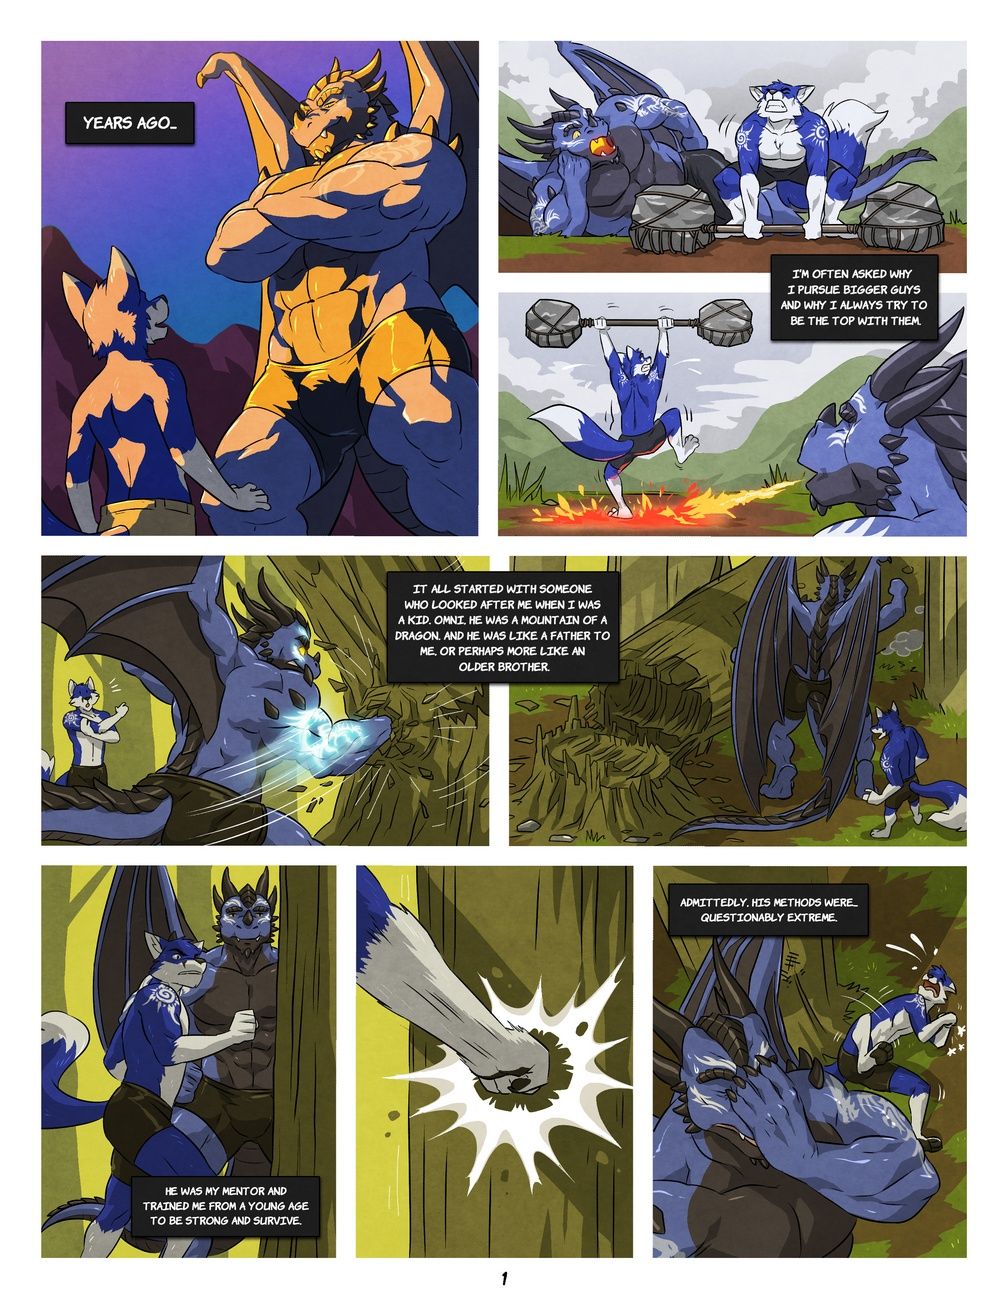 Black And Blue 2 page 2